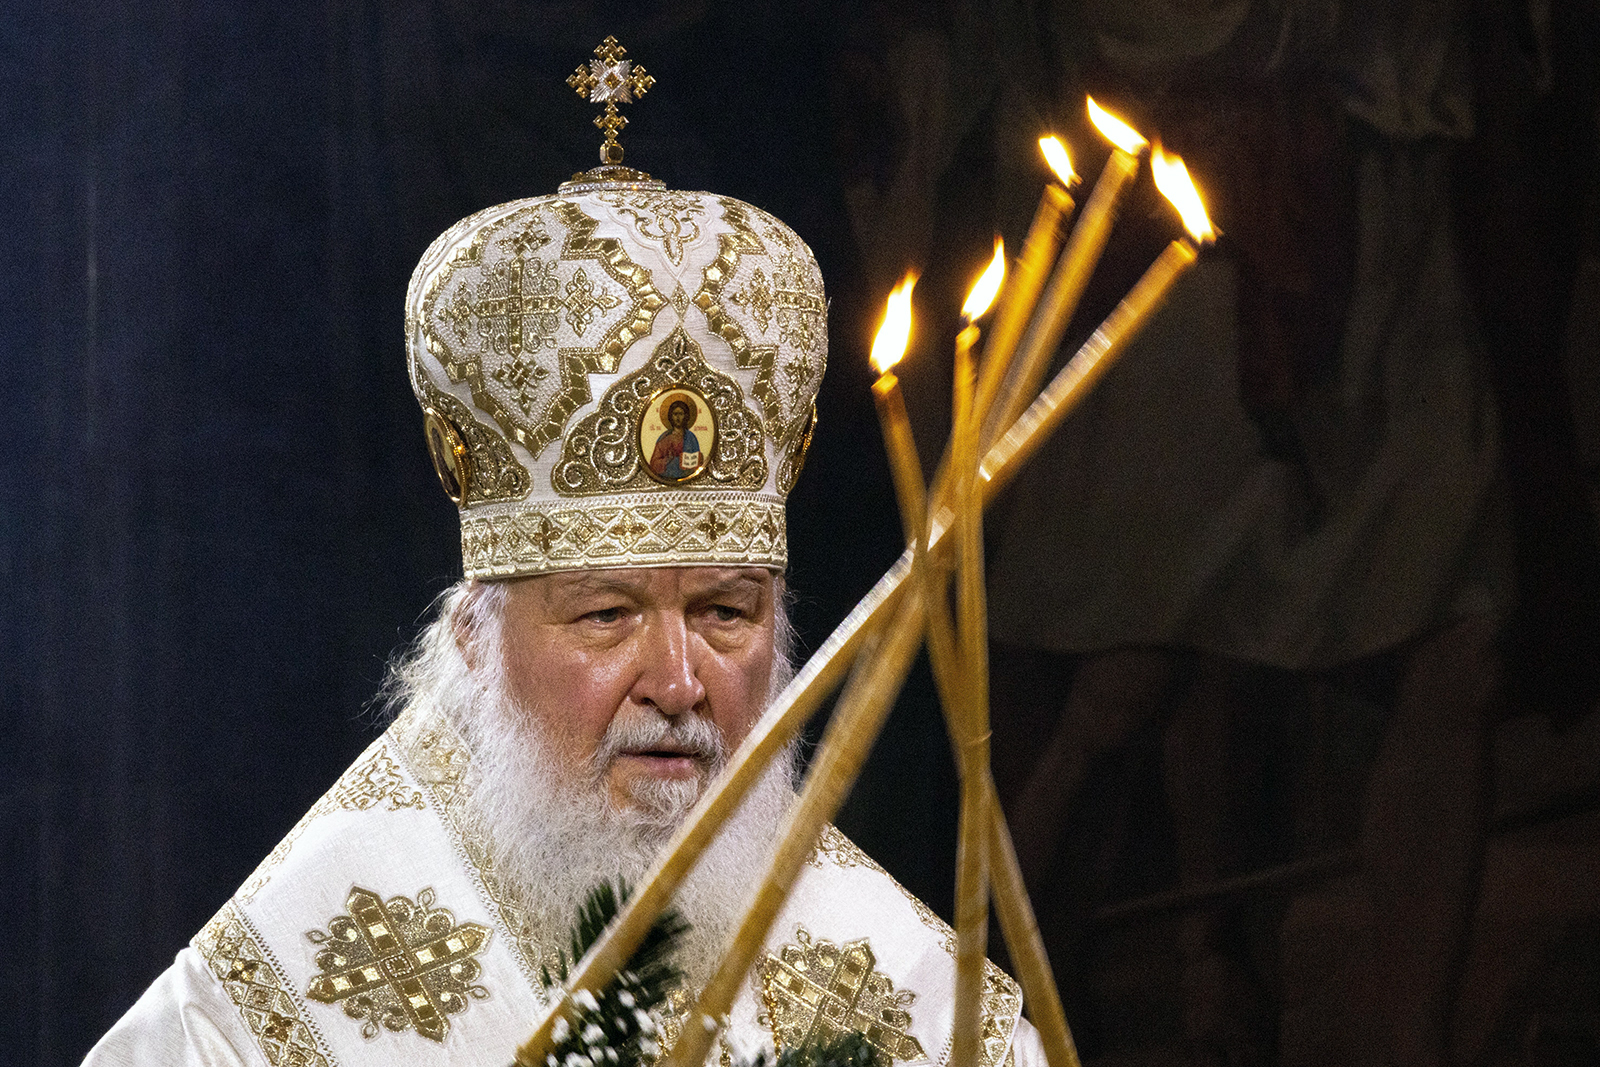 Russian Orthodox Patriarch Kirill in the Christ the Saviour Cathedral in Moscow, Russia, early Thursday, Jan. 7, 2021. (AP Photo/Alexander Zemlianichenko)